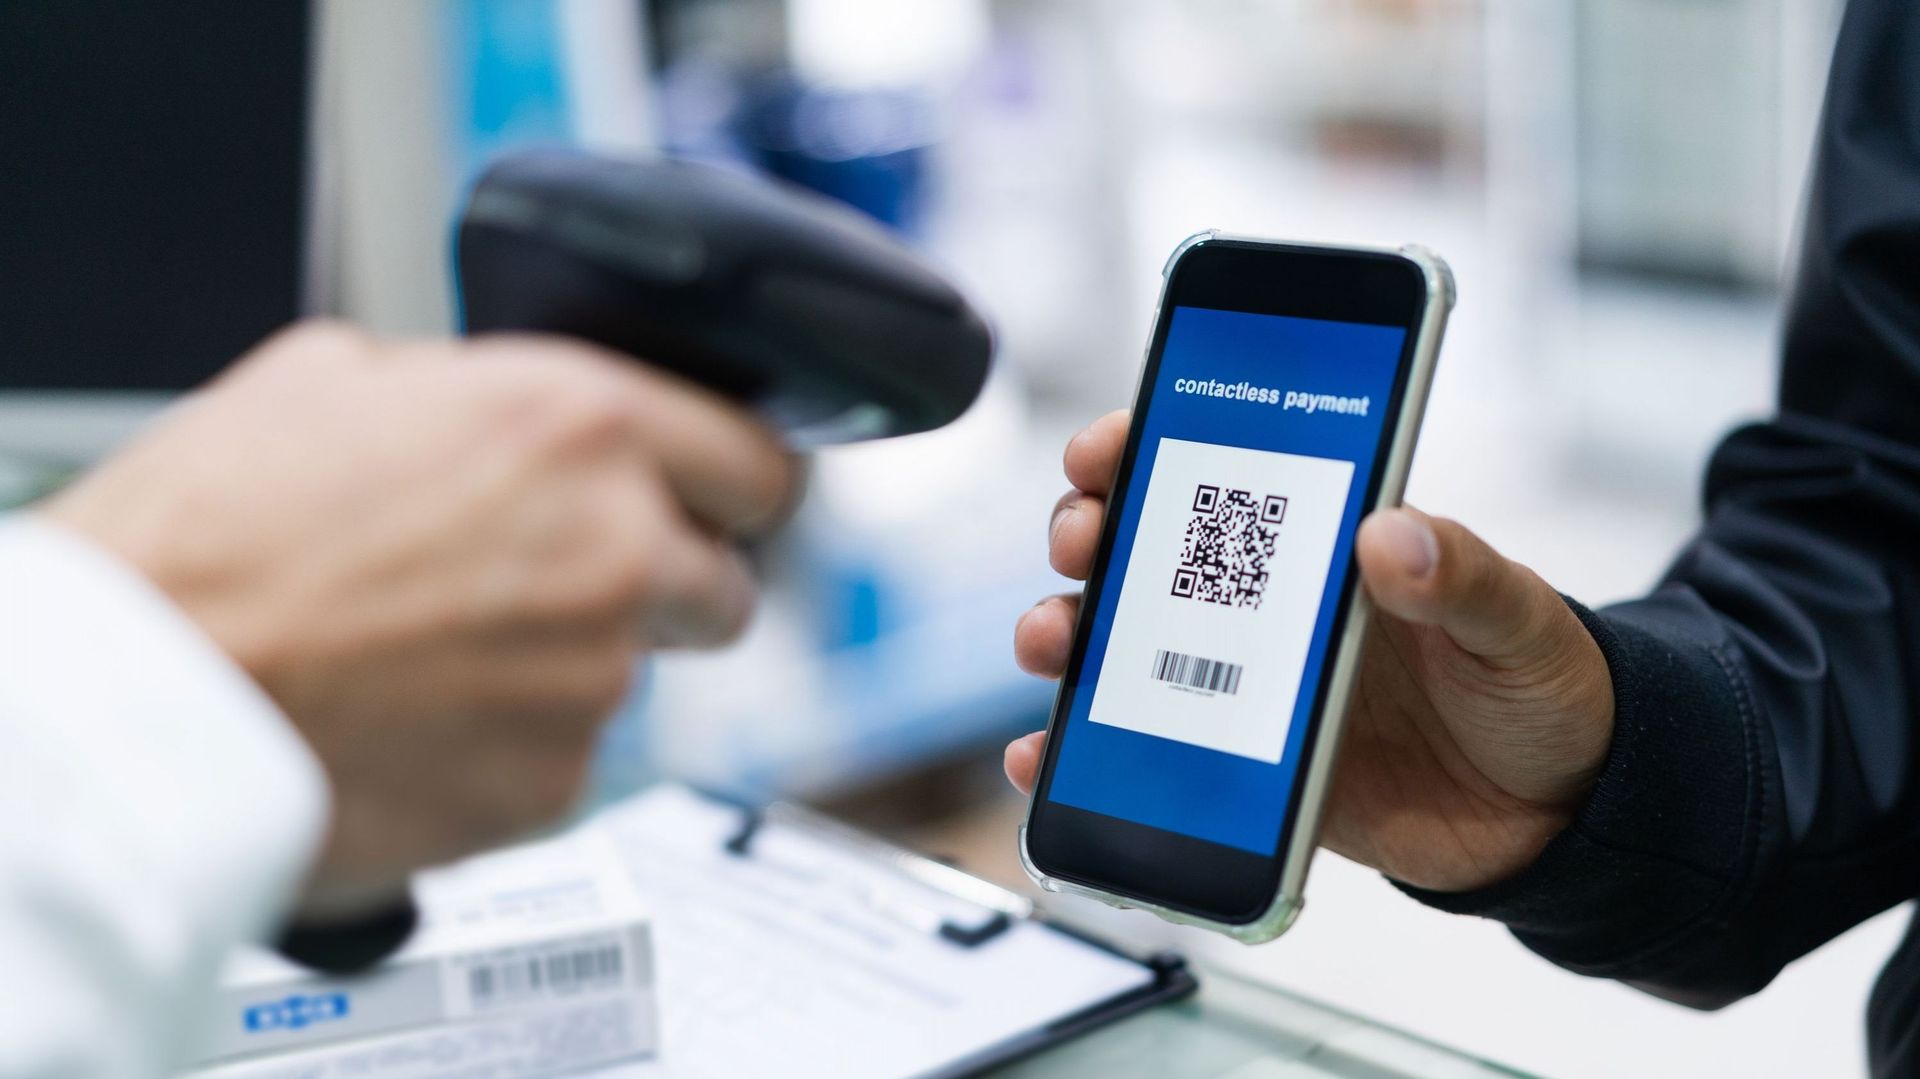 Contactless payment with QR code in smartphone.